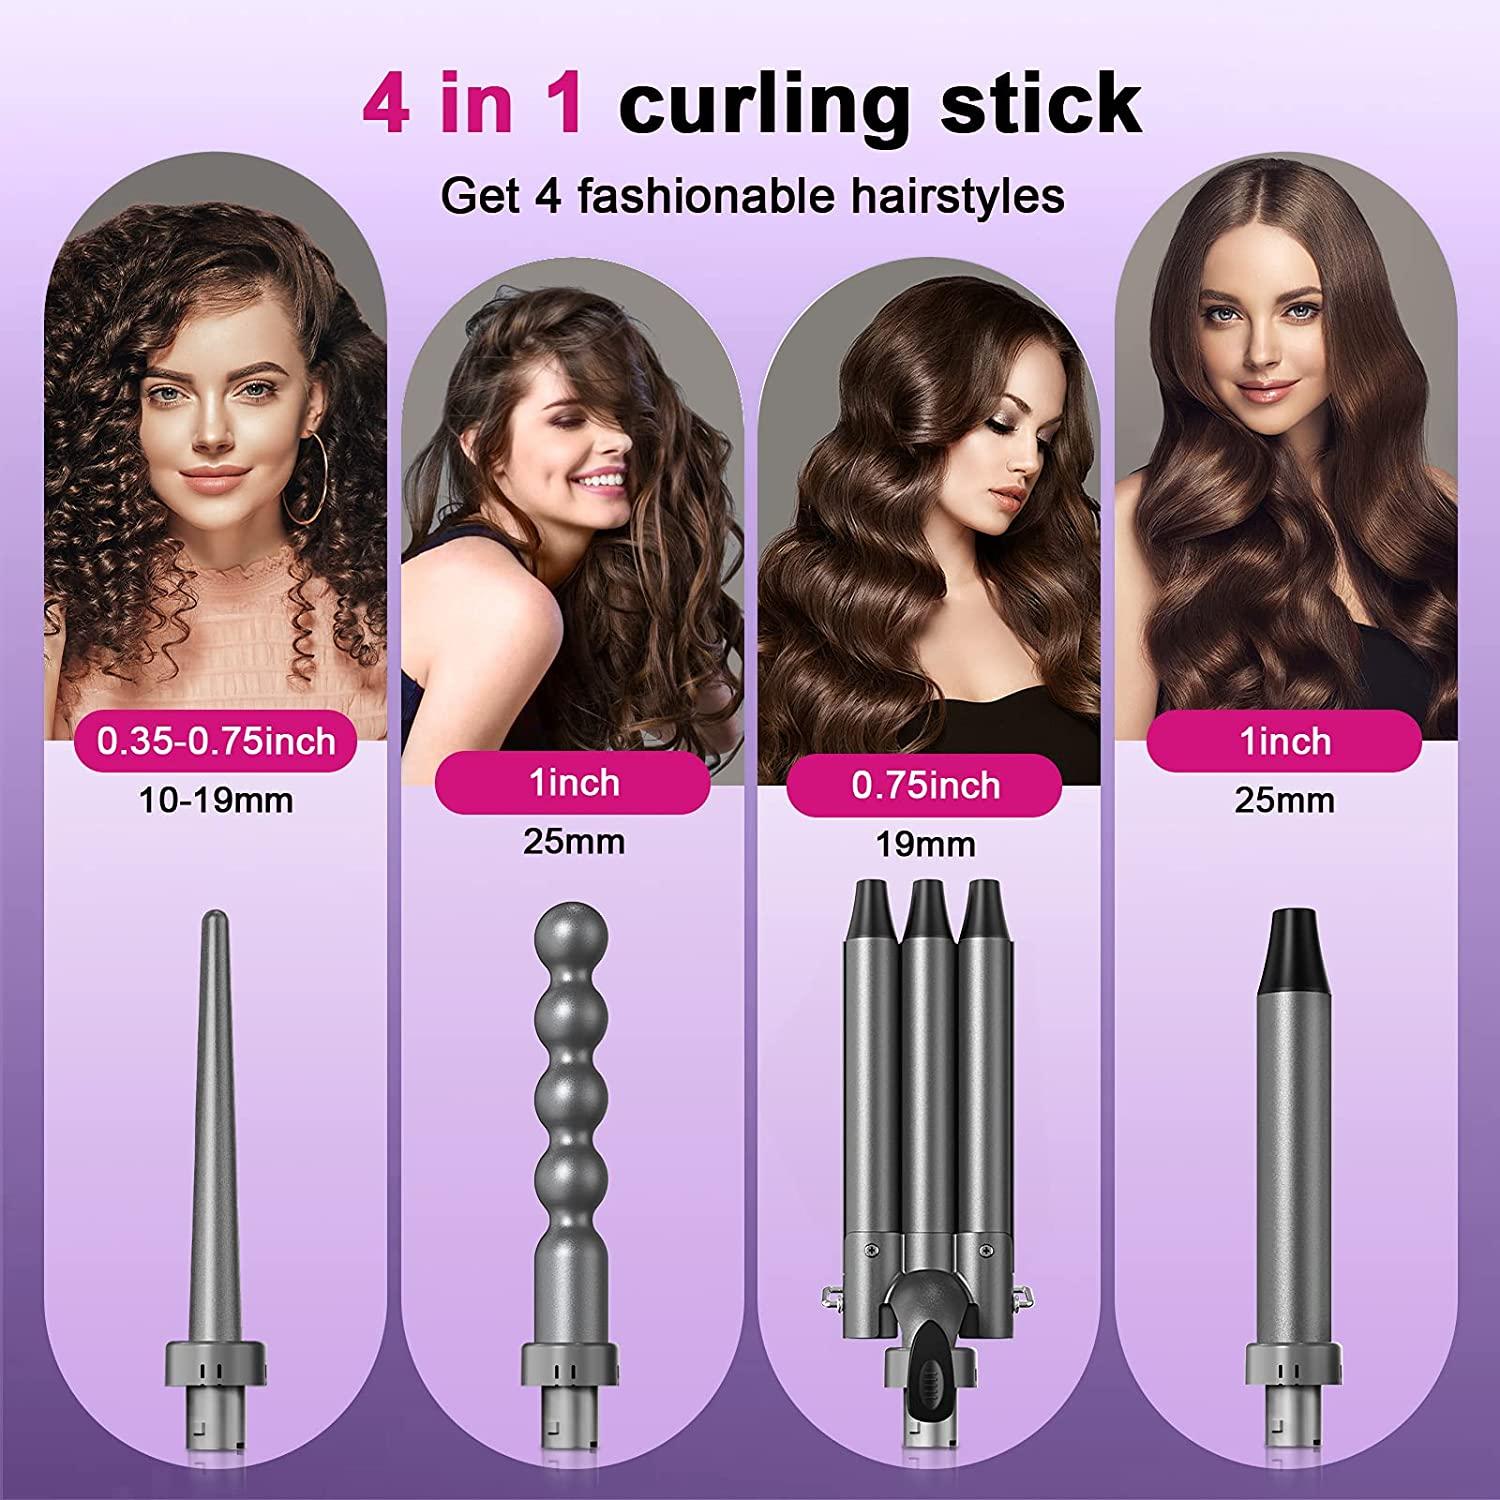 Curling Iron 3 Barrel Hair Waver,Siyaluens 4 in 1 Curling Wand Set with 4  Interchangeable Ceramic Tourmaline Barrels ,LCD Temp Control  Instant Heat Up,Hair Crimper with Glove & 2 Hair Clips